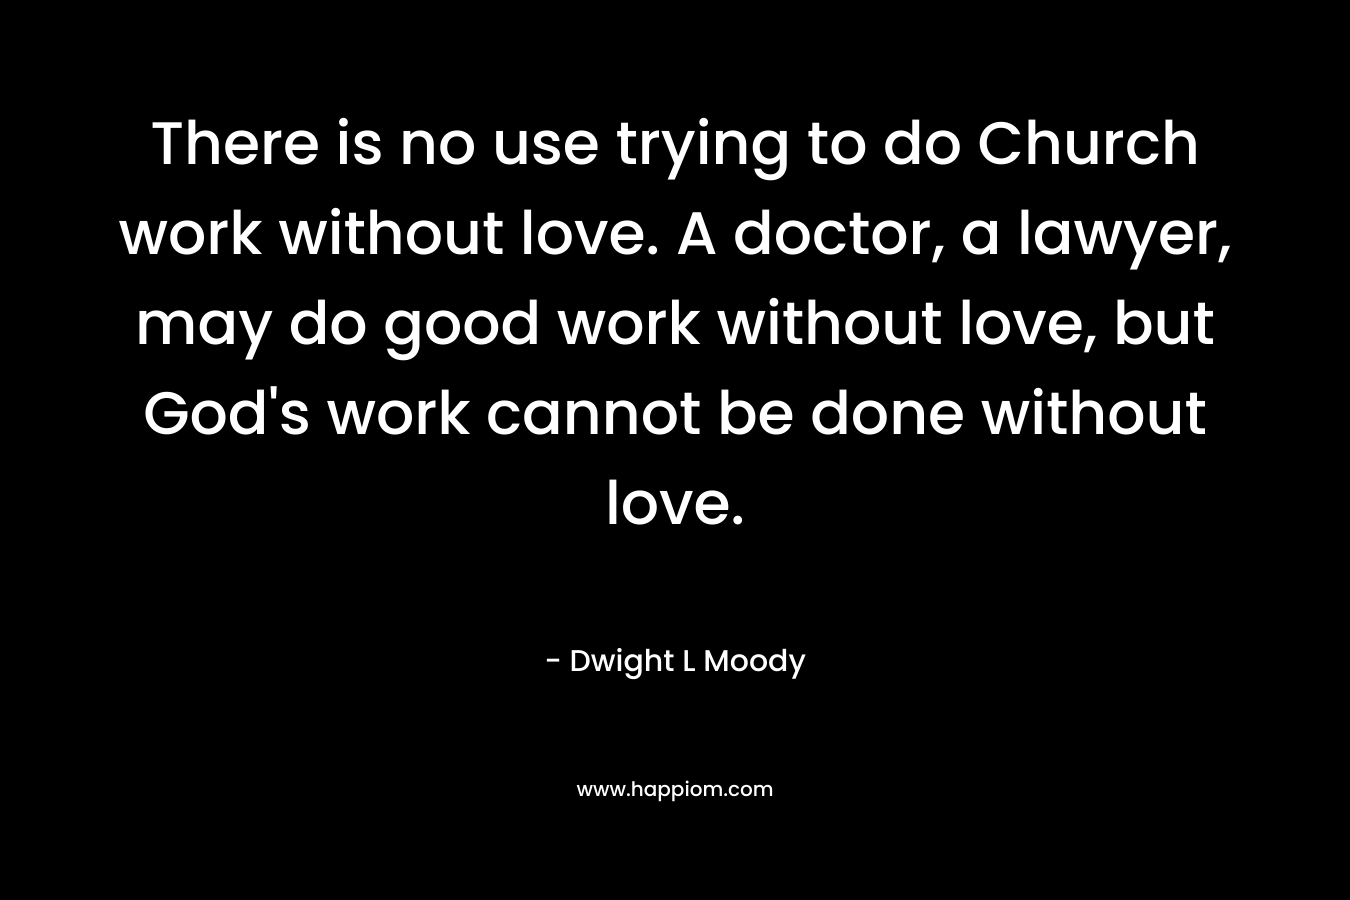 There is no use trying to do Church work without love. A doctor, a lawyer, may do good work without love, but God's work cannot be done without love.